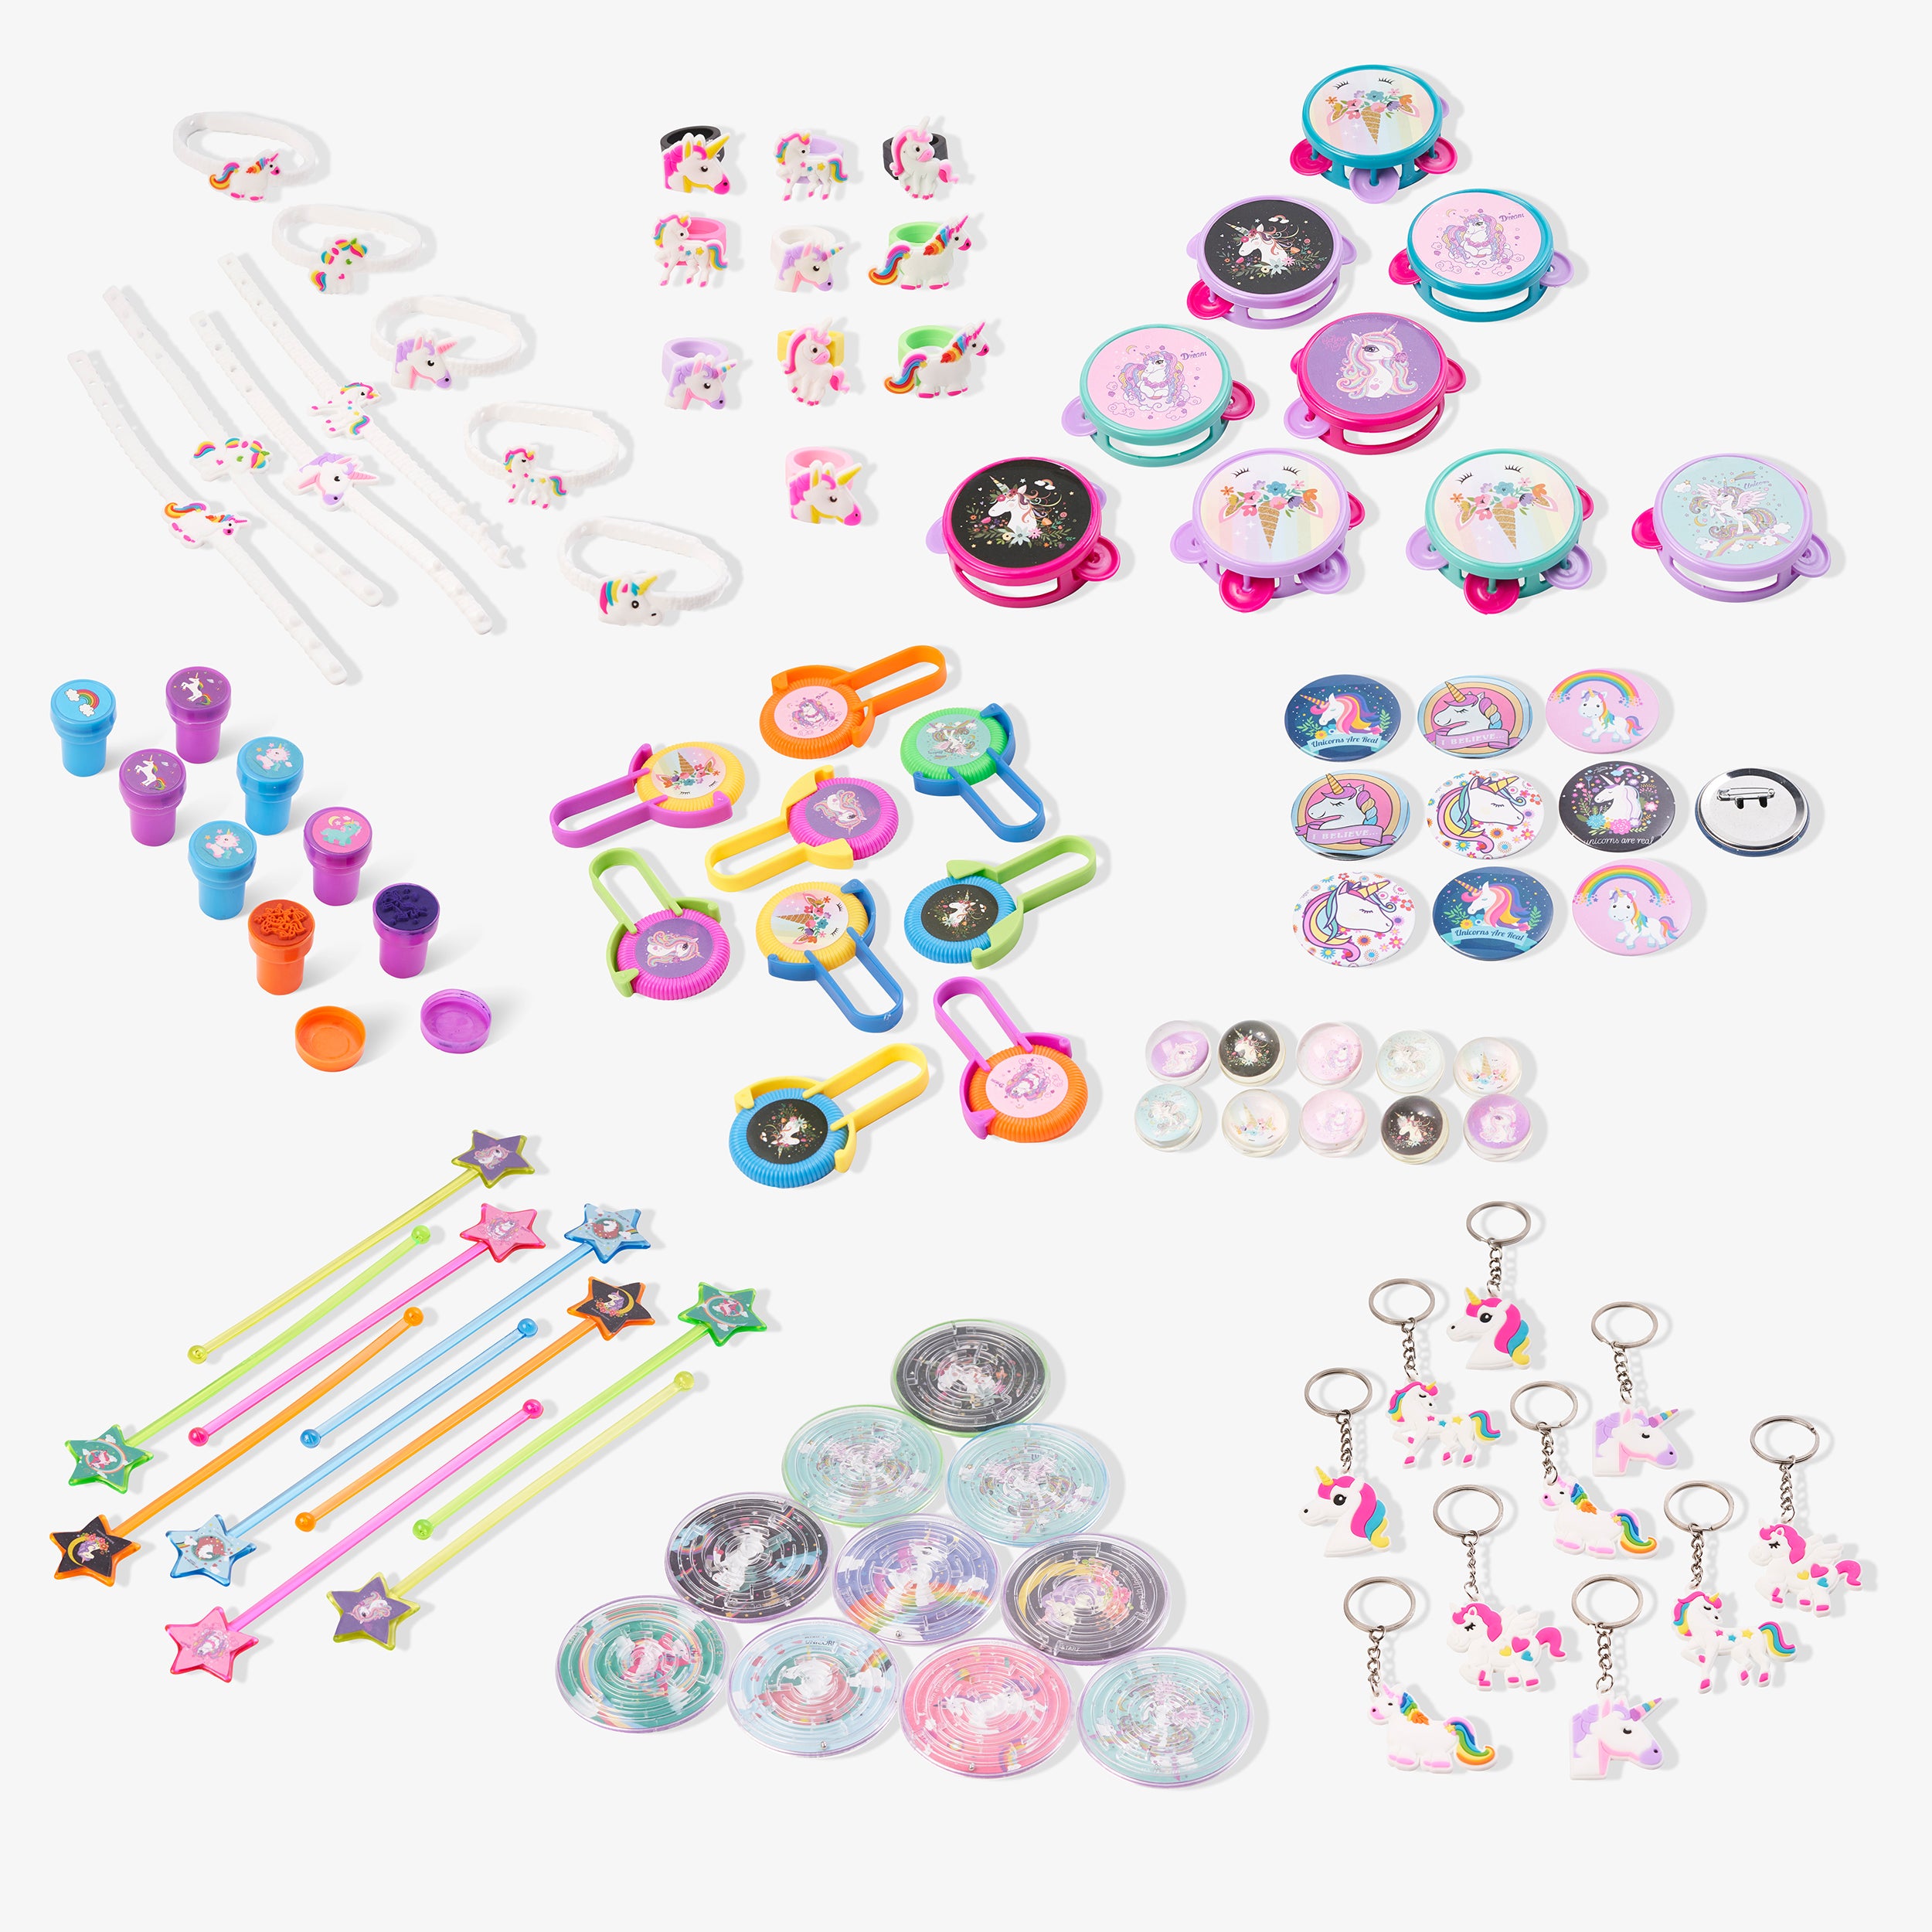 100 Unicorn Party Bag Fillers